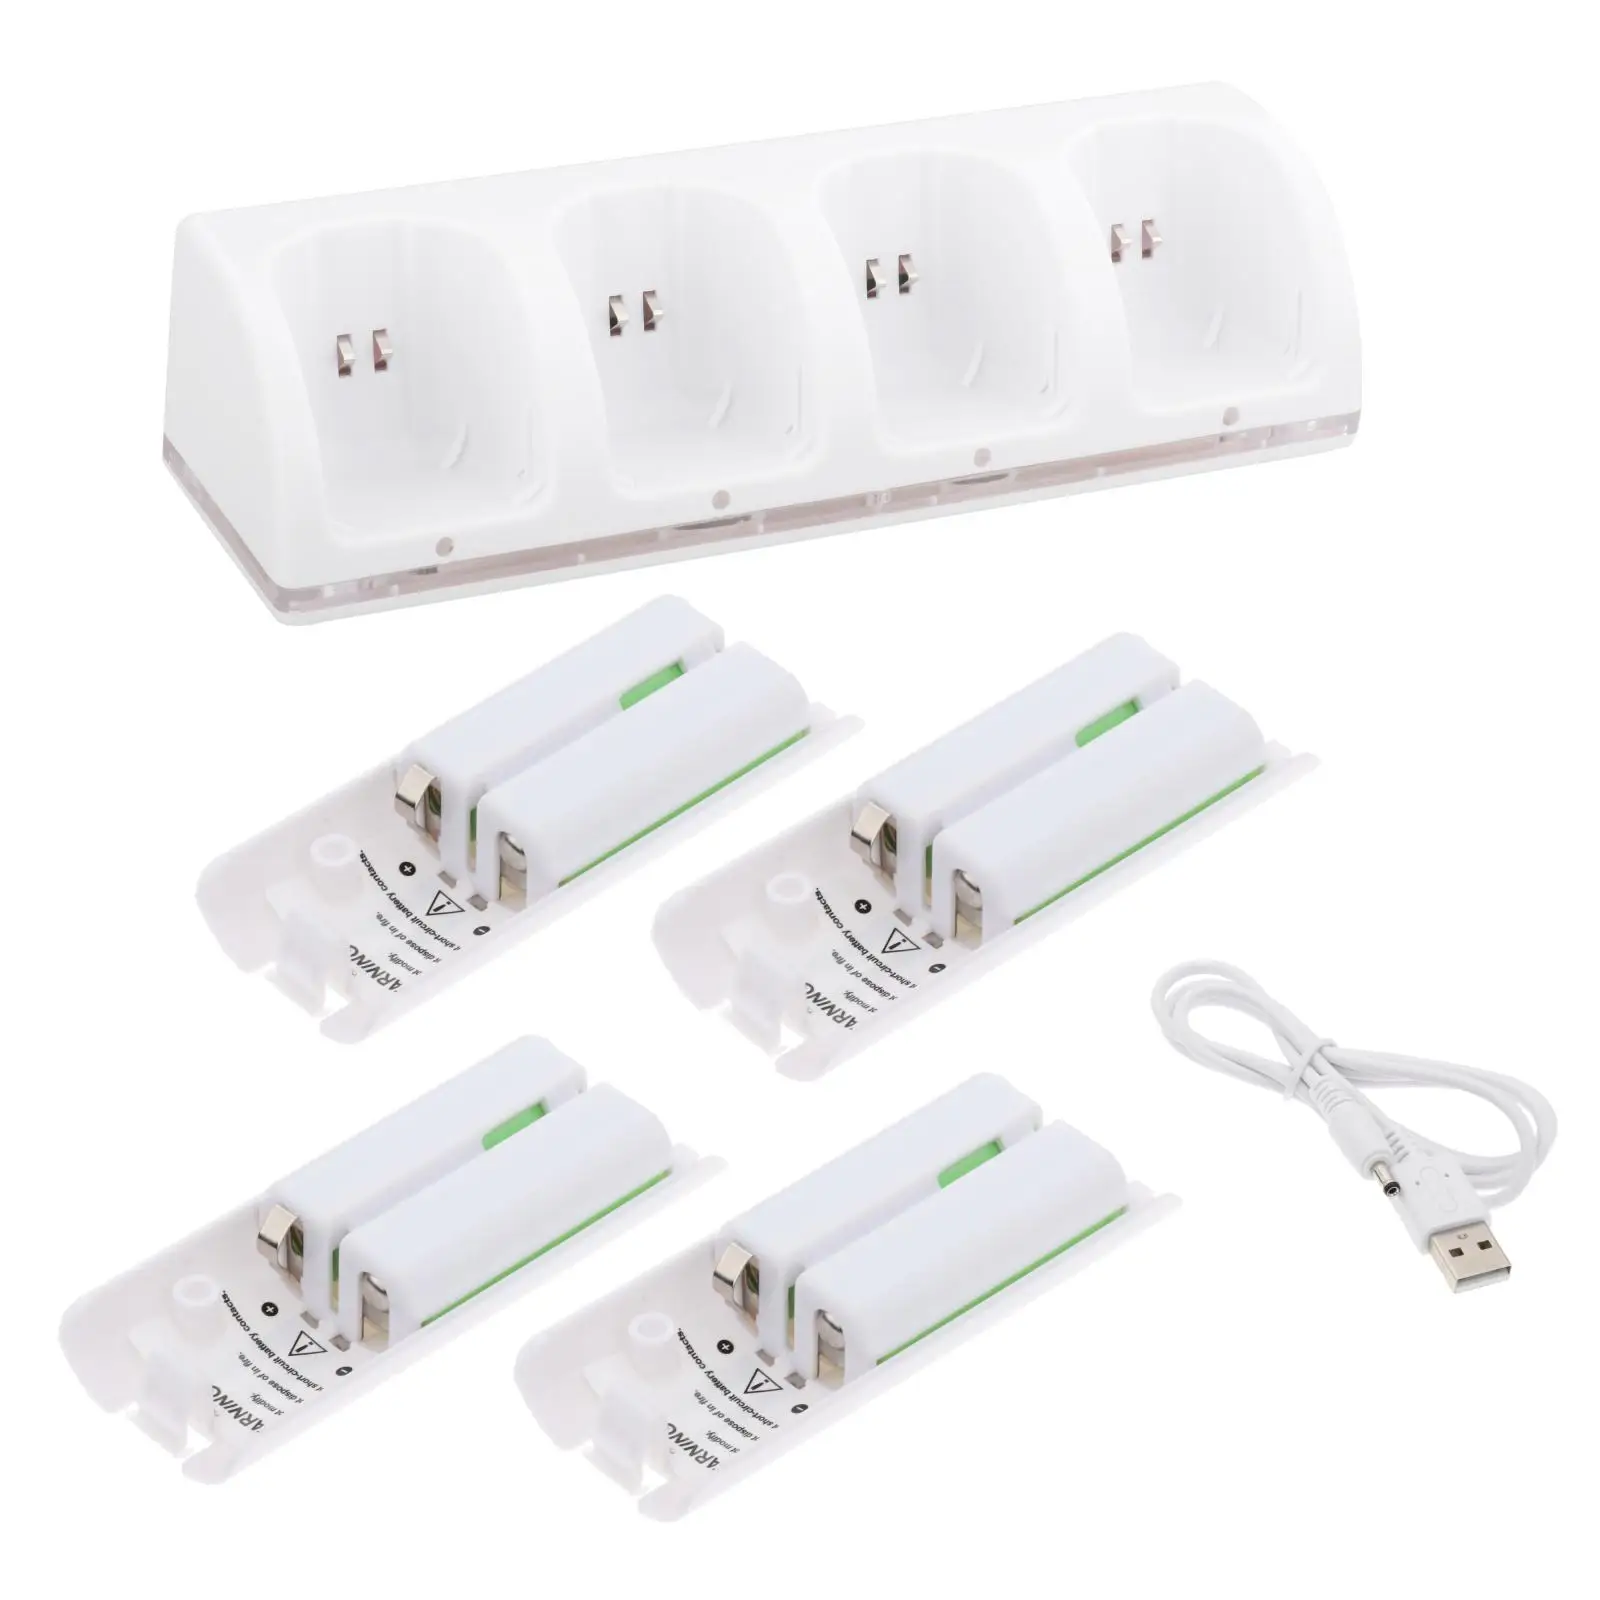 Charging Dock Station with 4 Rechargeable Batteries and USB Cable, 4 in 1 Battery Charger for Wii Controller Game Accessories